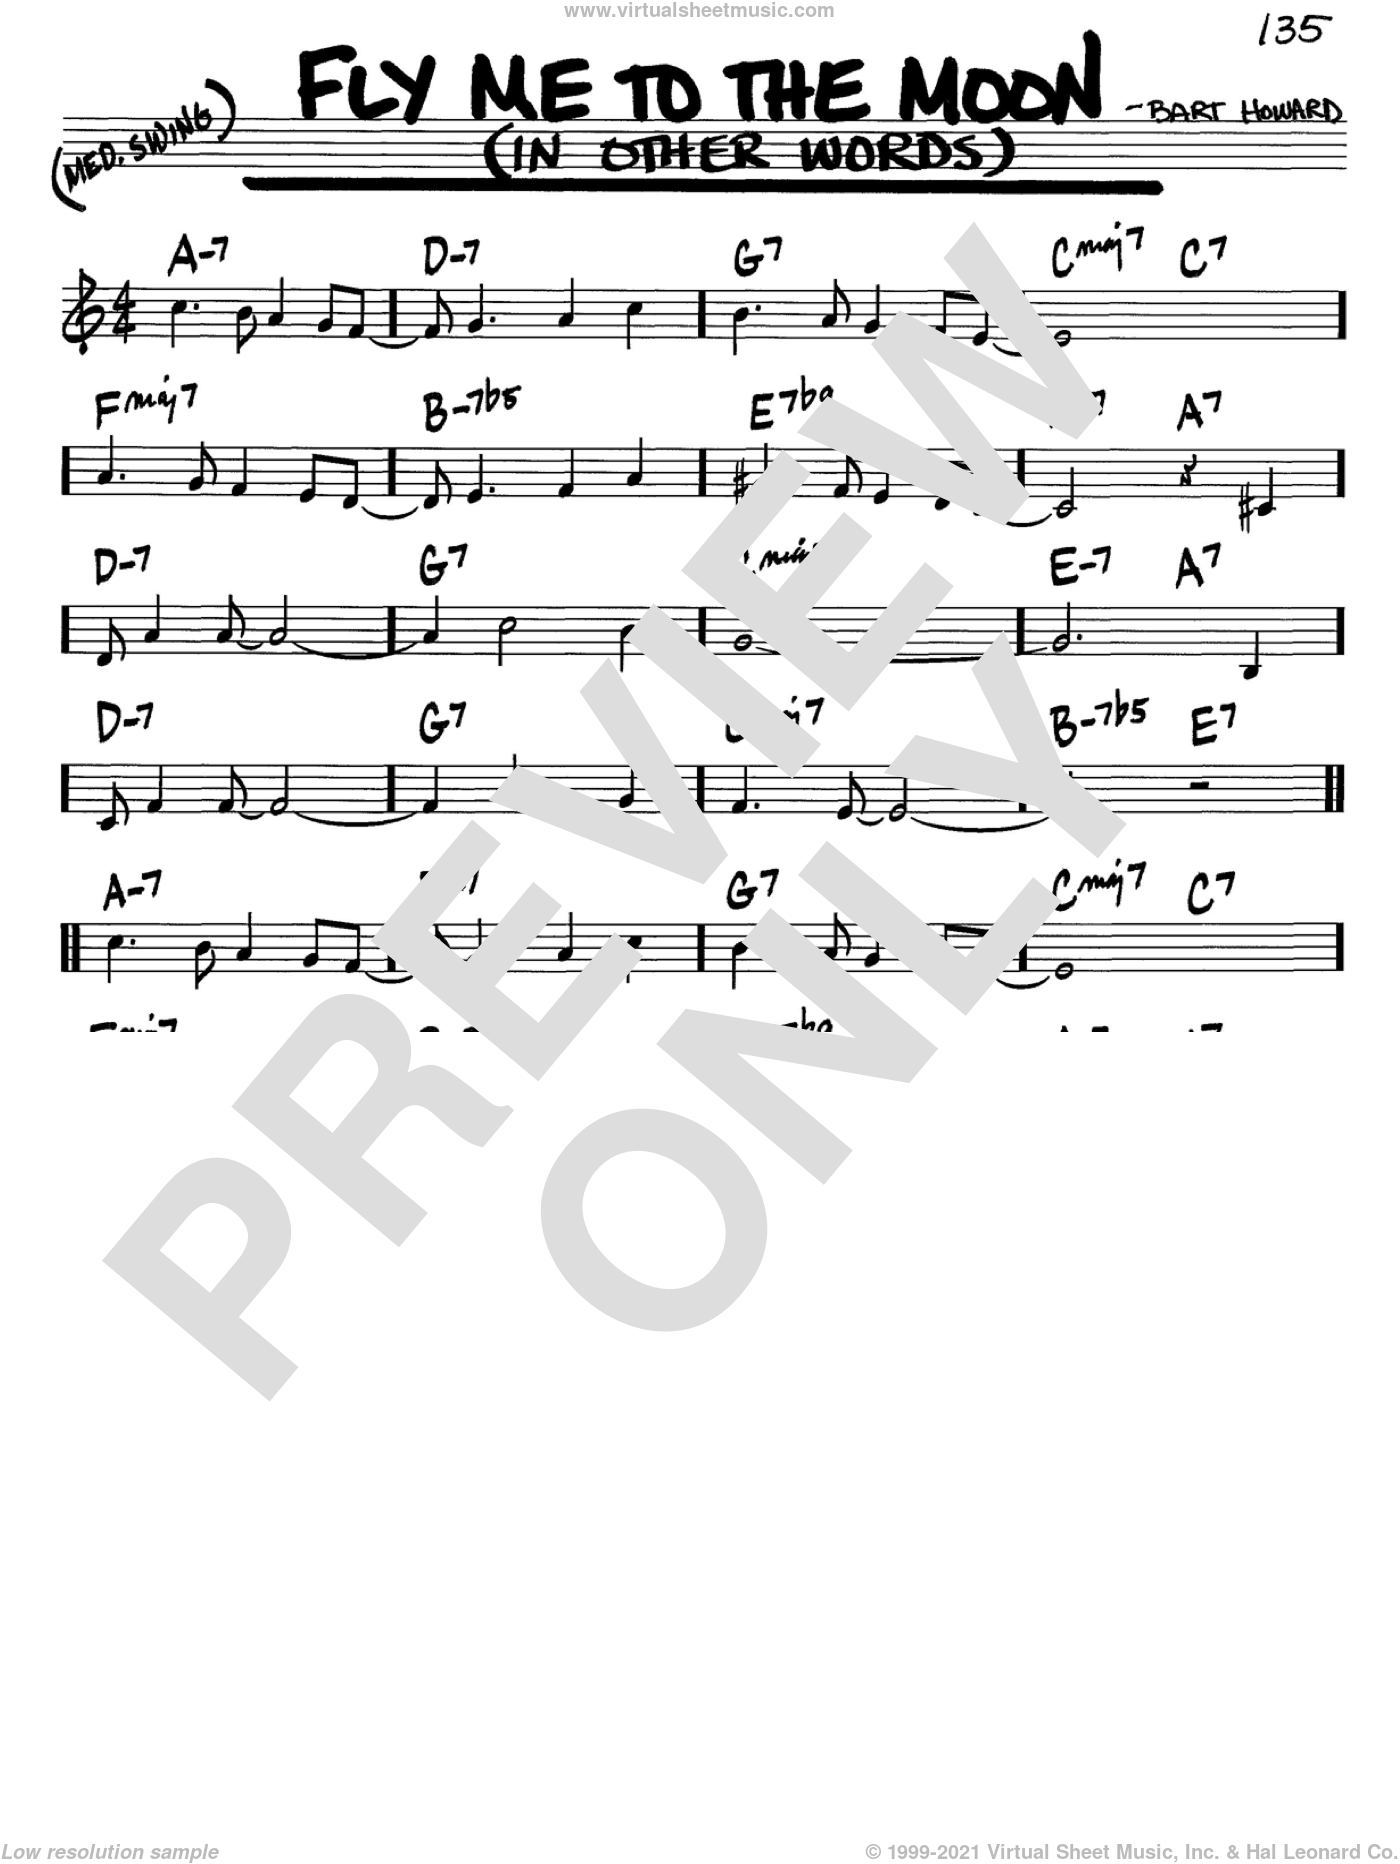 Fly Me To The Moon (In Other Words) sheet music (real book melody and